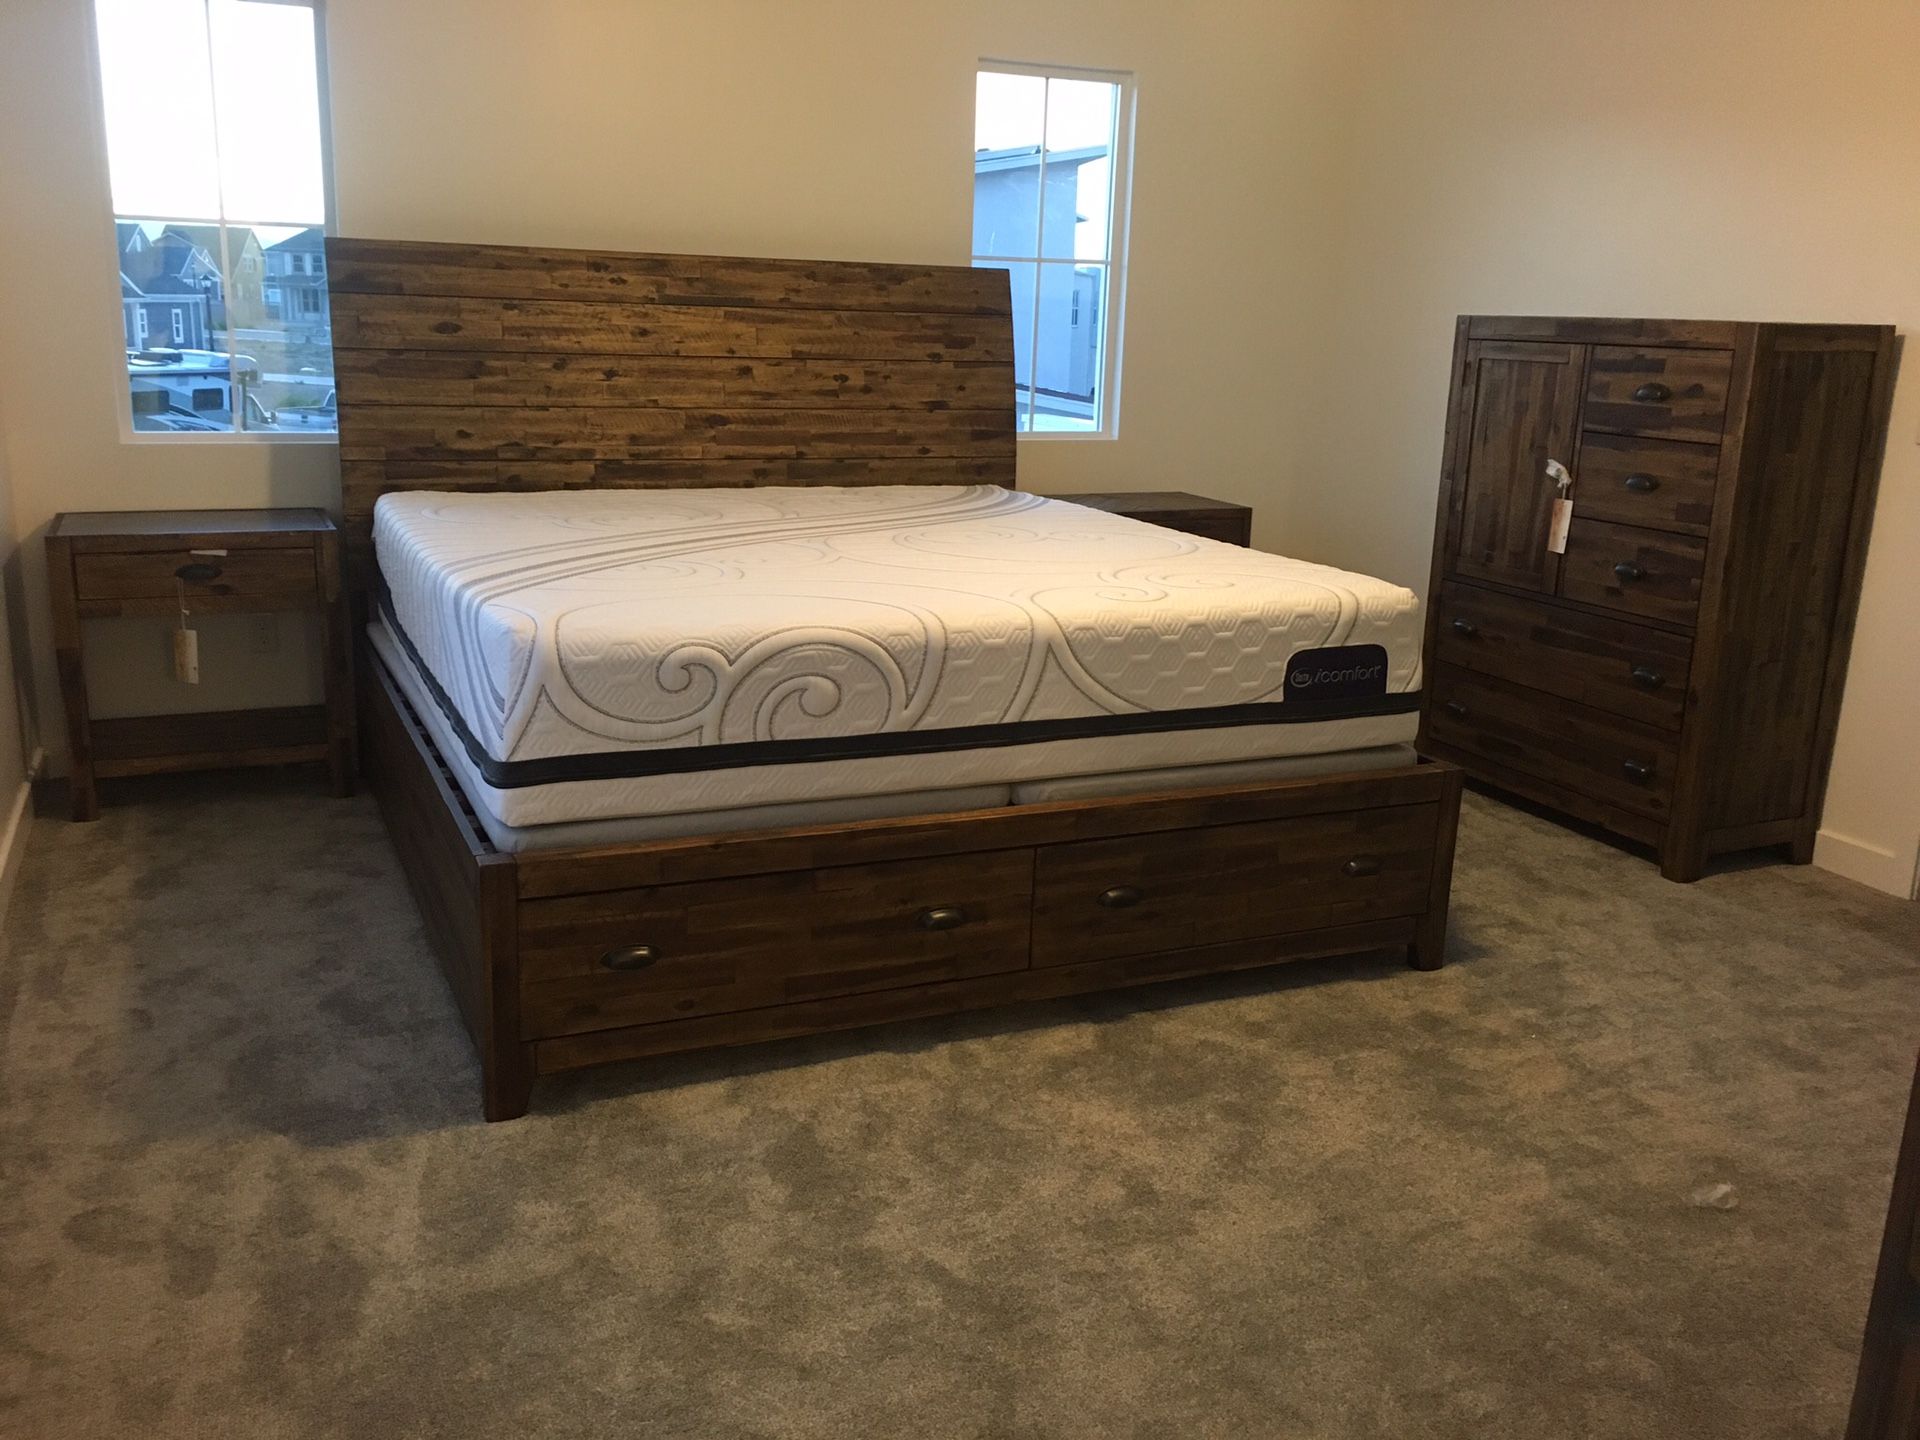 DISCOUNTED! Solid wood 6 piece king size wood Bedroom set